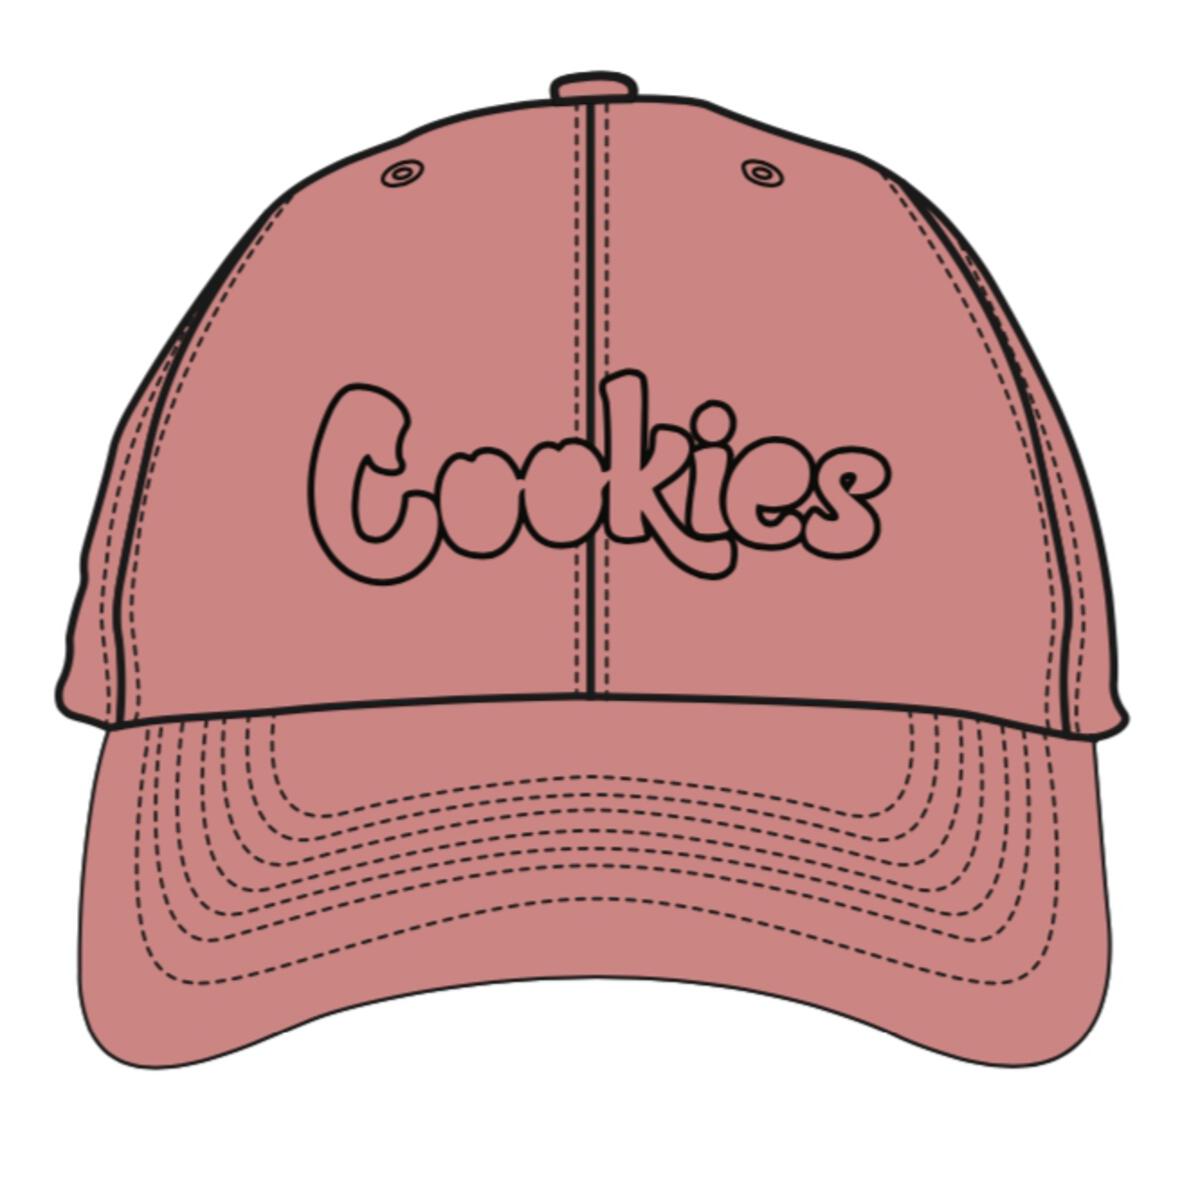 Cookies - Infantry Hat - Dusty Rose - 1560X6019